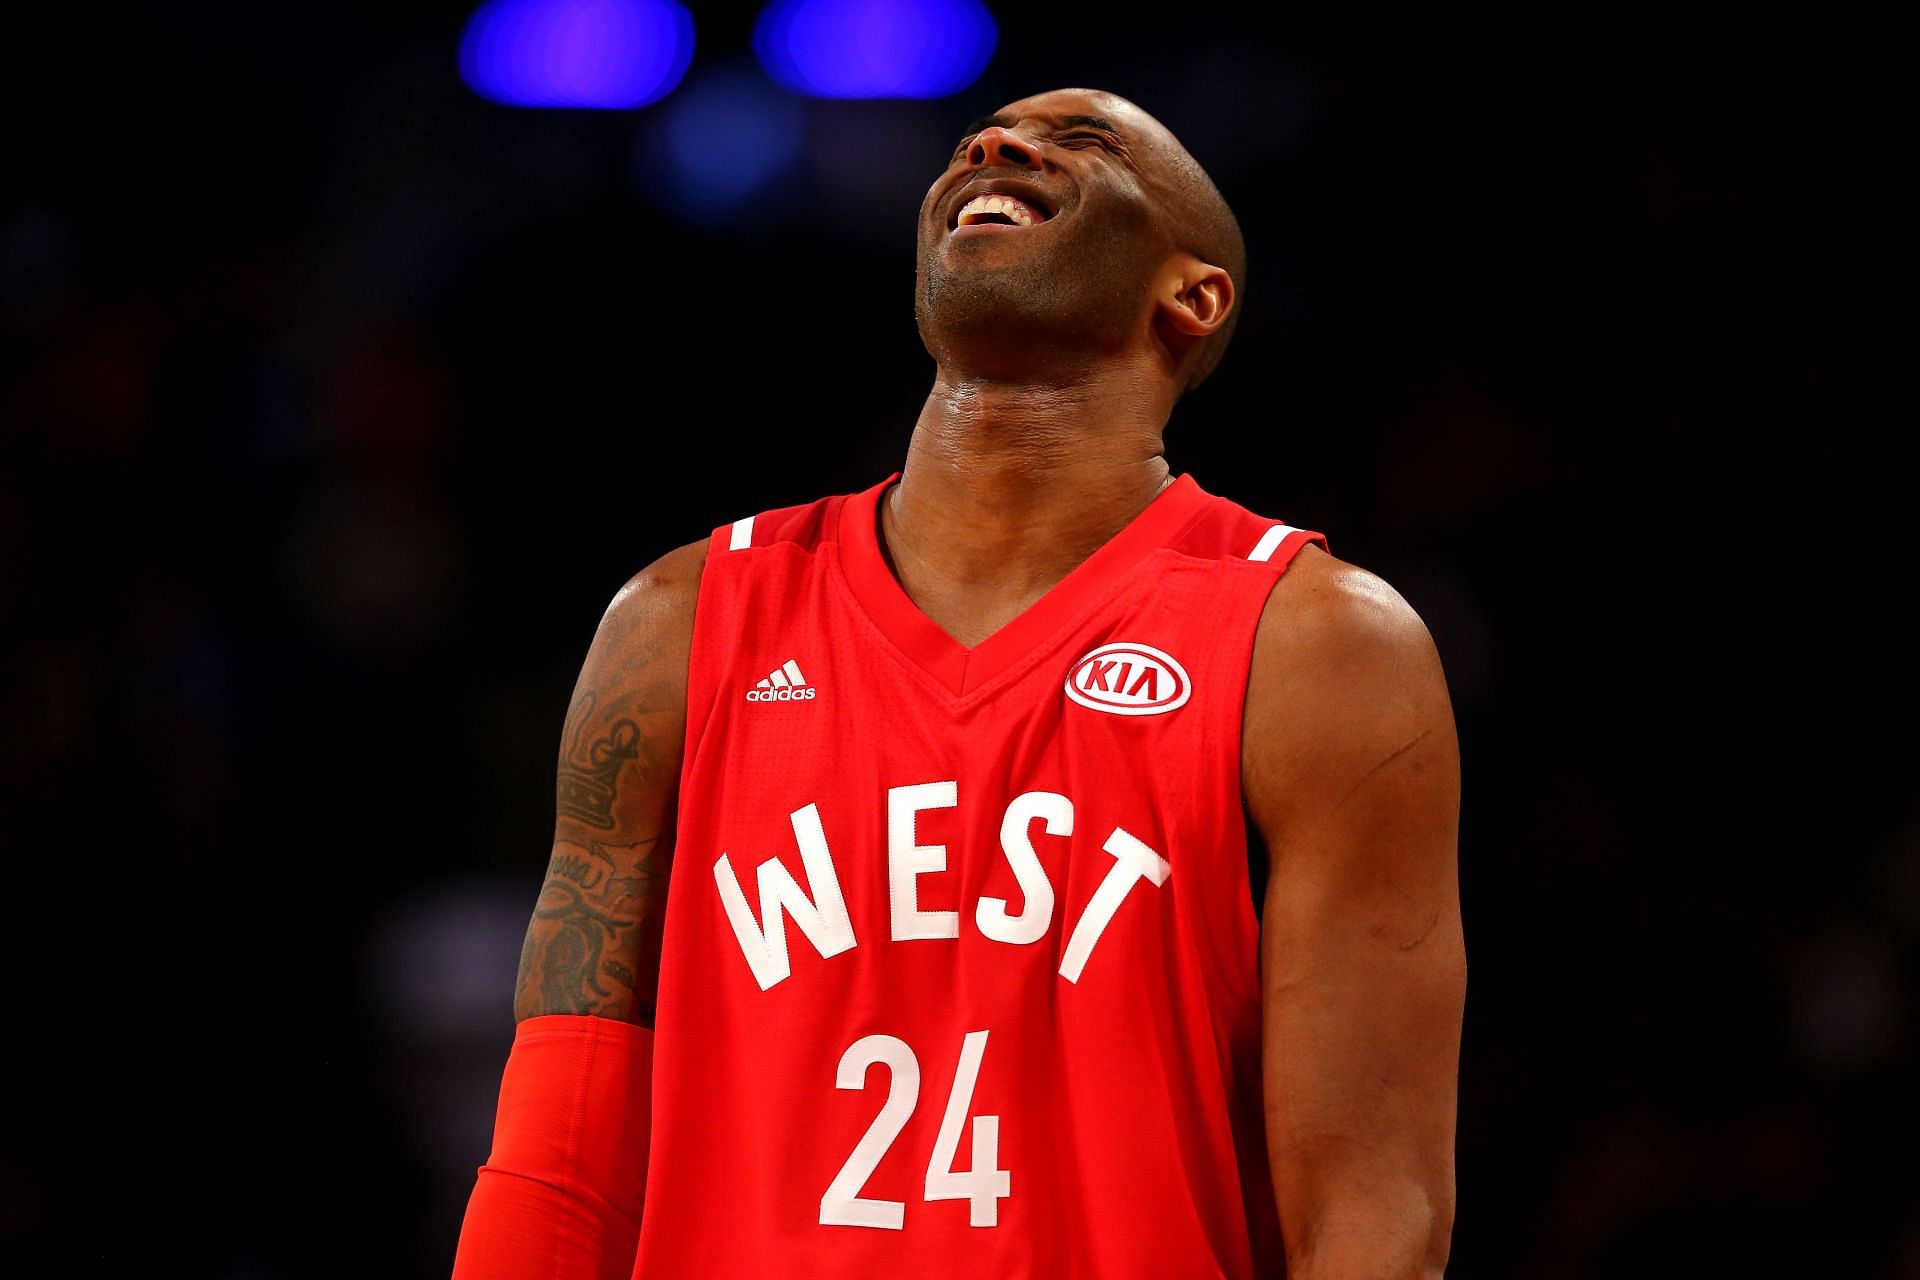 Kobe Bryant reacts during his last NBA All-Star Game in 2016.